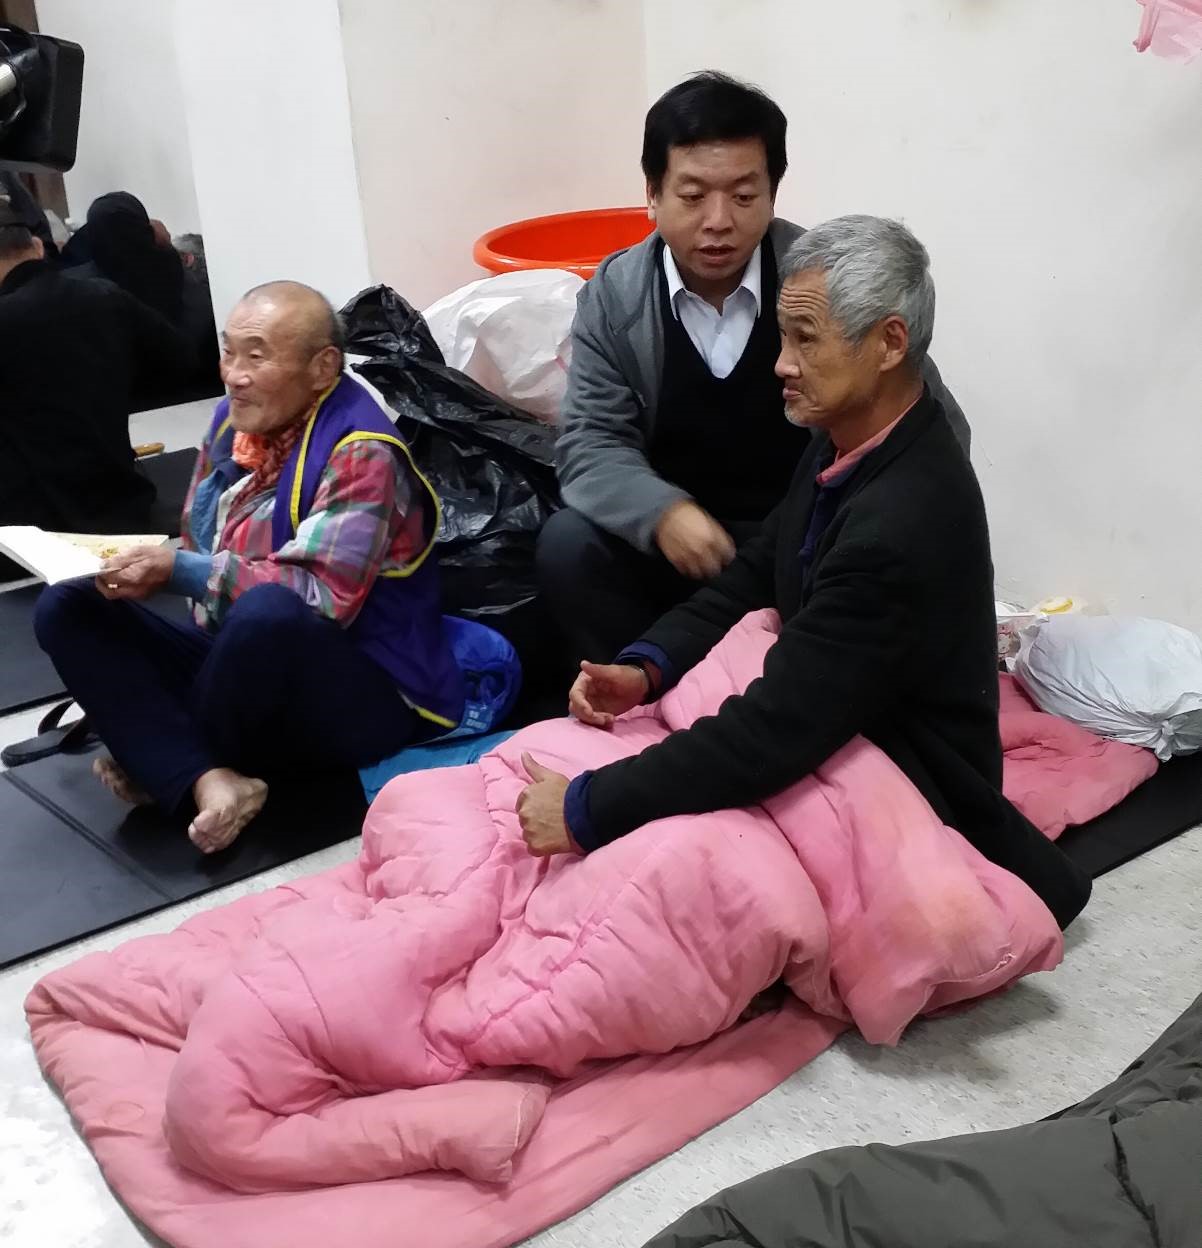 Our commissioner visited the homeless people